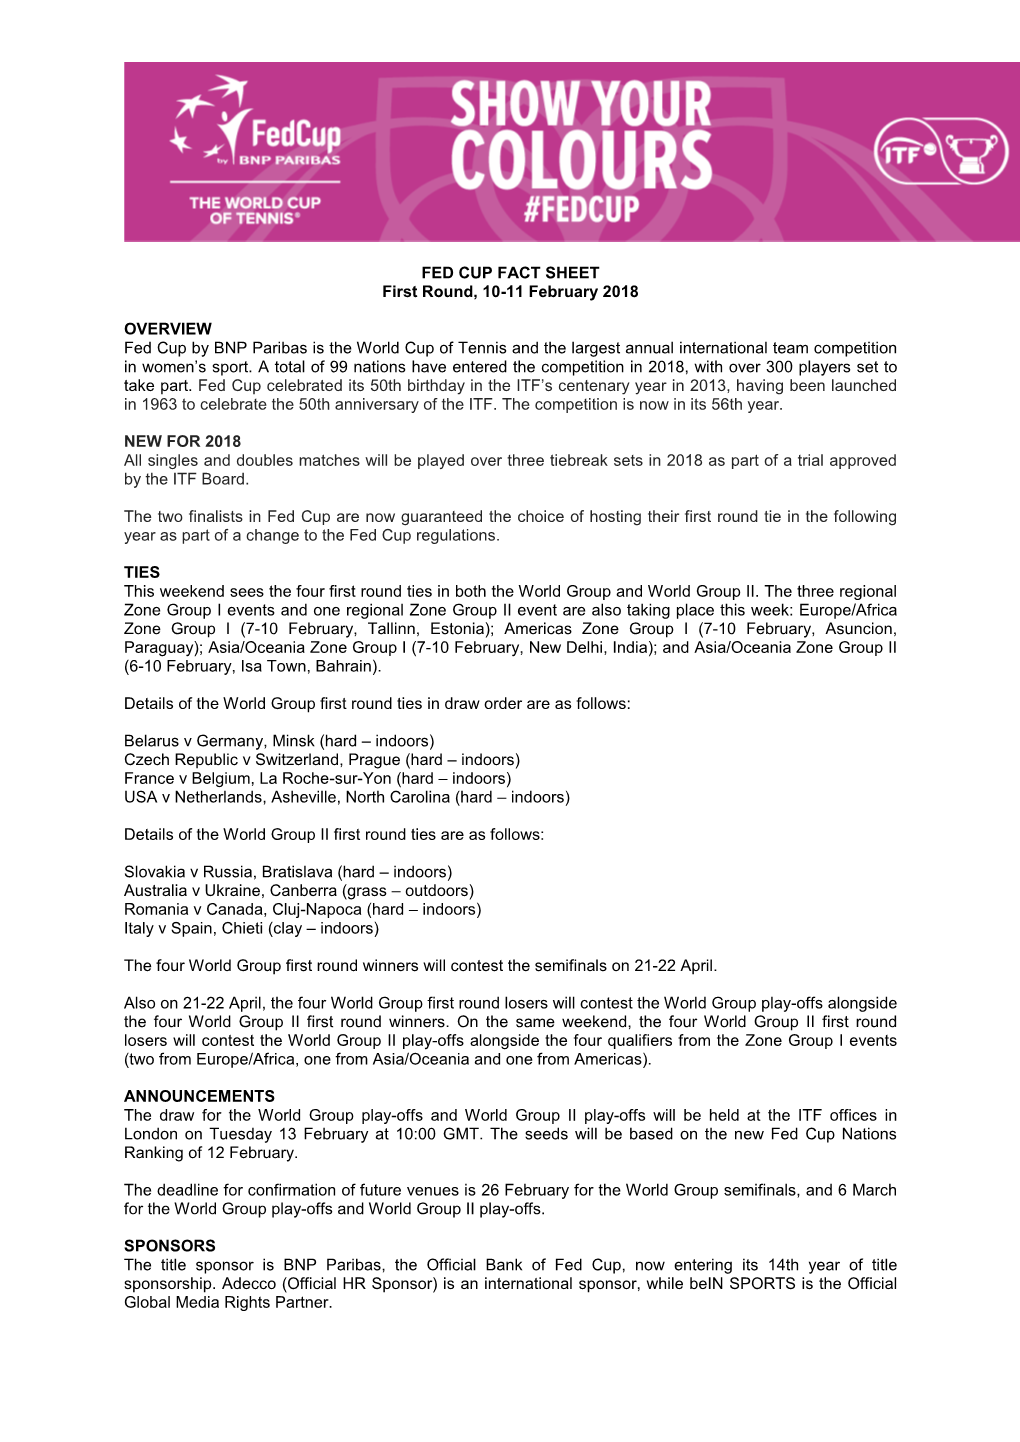 FED CUP FACT SHEET First Round, 10-11 February 2018 OVERVIEW